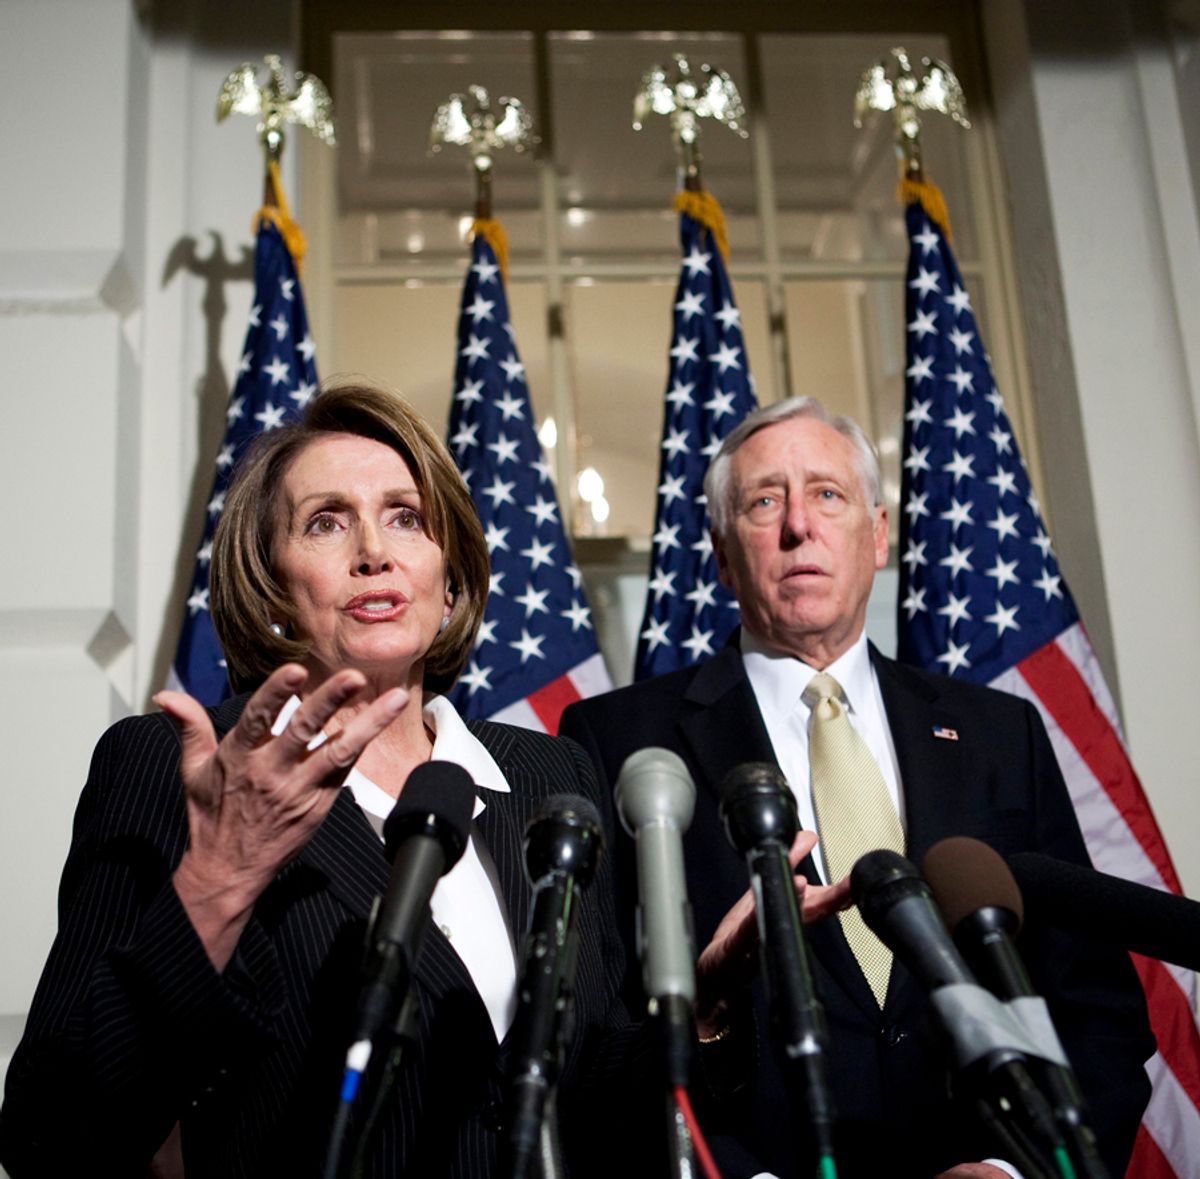 Speaker of the House Nancy Pelosi and House Majority Leader Rep. Steny Hoyer (D-MD) speak about the stimulus package in Washington, DC, February 11, 2009. U.S. lawmakers reached a compromise deal on Wednesday on a $789 billion package of tax cuts and spending to rescue the ailing economy and votes could begin as early as Thursday.  REUTERS/Joshua Roberts (UNITED STATES) (Â© Joshua Roberts / Reuters)